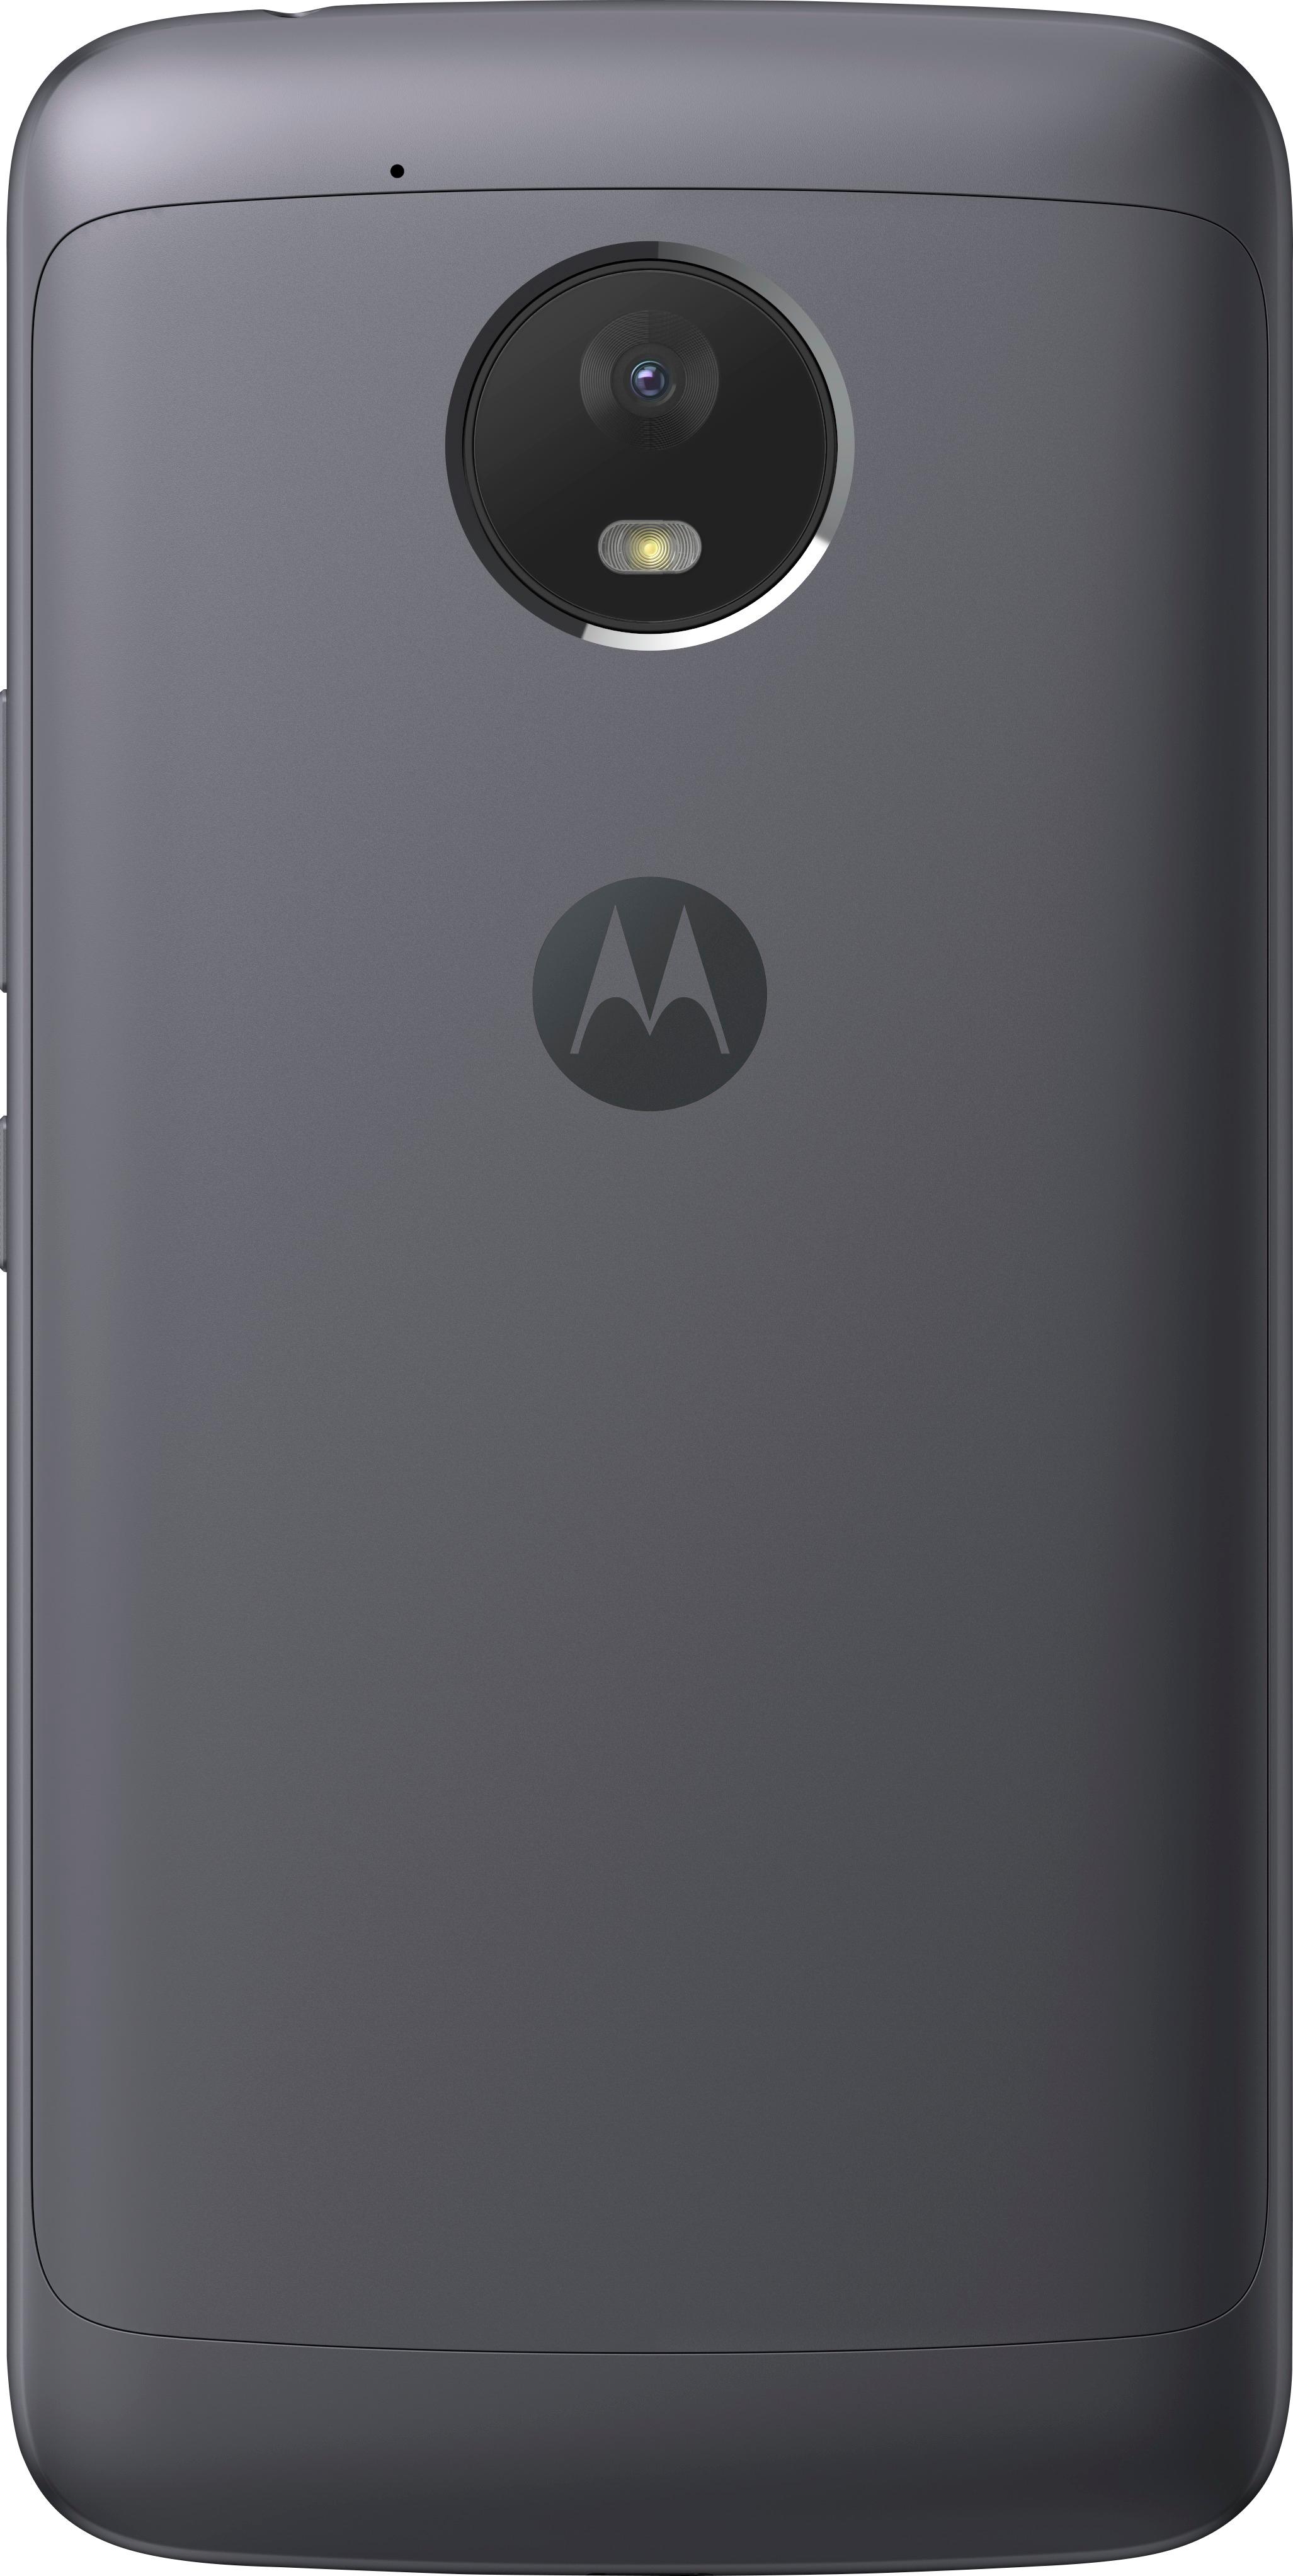 Hands-on: Moto E4 Plus has 5 big differences compared to the E4